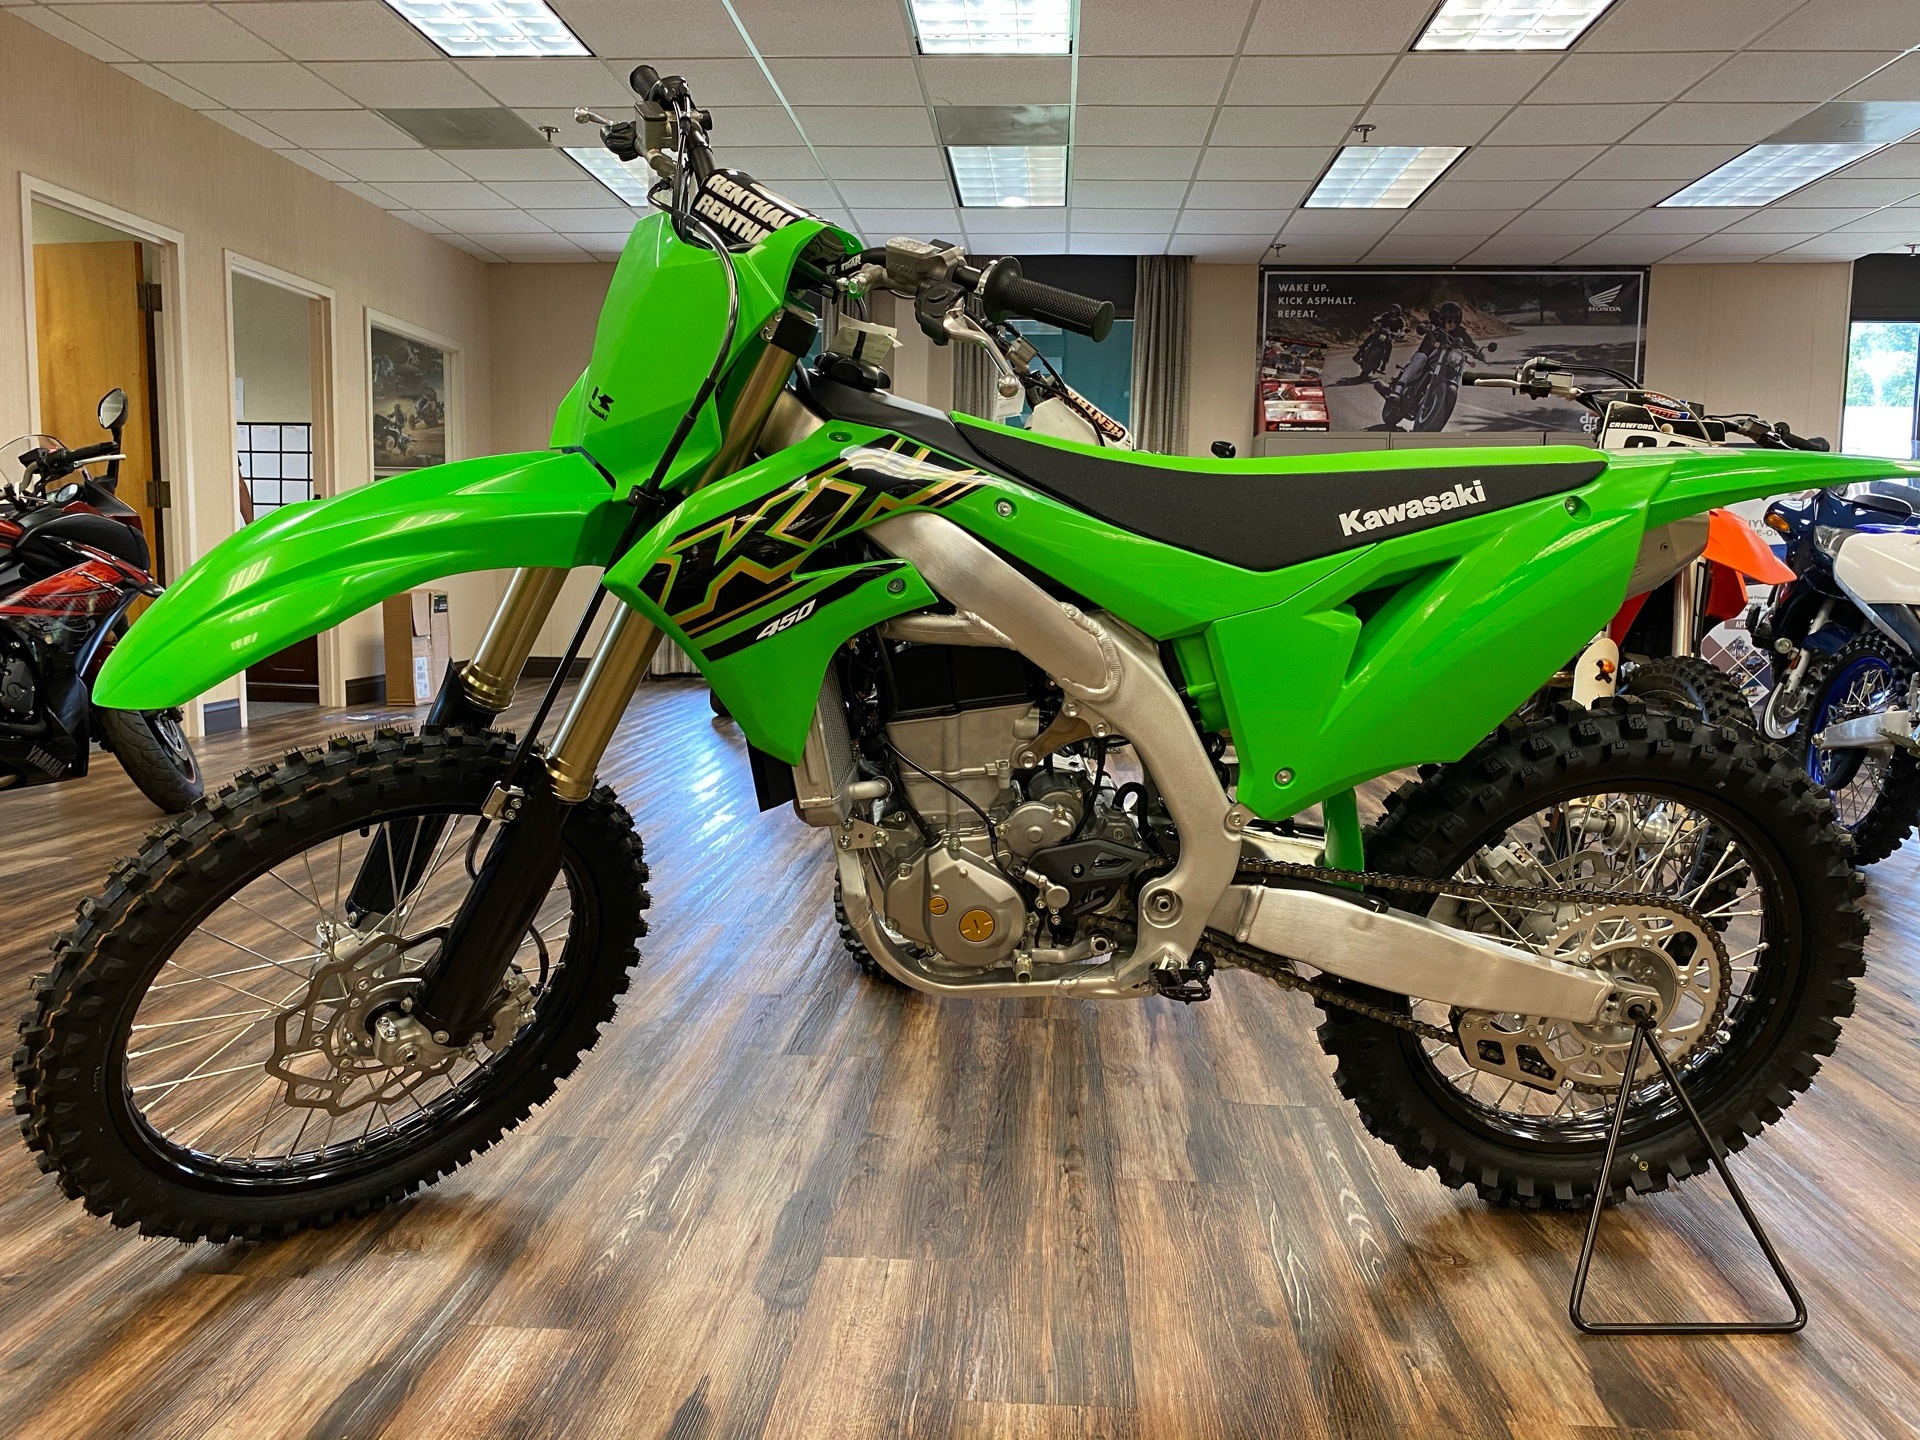 New 2021 Kawasaki 450 Motorcycles in Statesville, NC | Stock Number: -